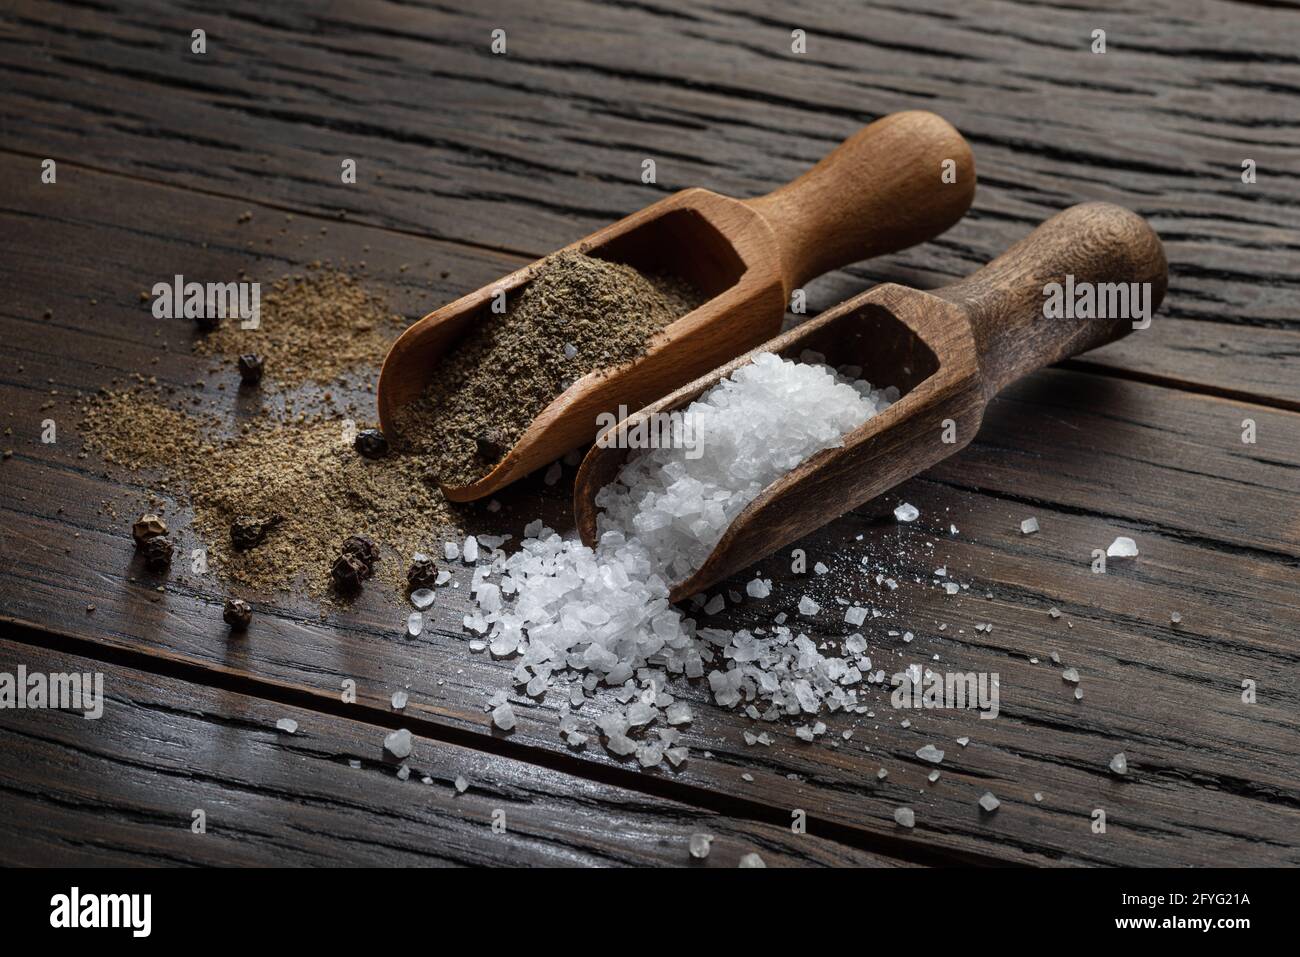 Sea salt and ground pepper in the wooden spoons on old wooden background. Two most popular ingredients that you put into food. Stock Photo